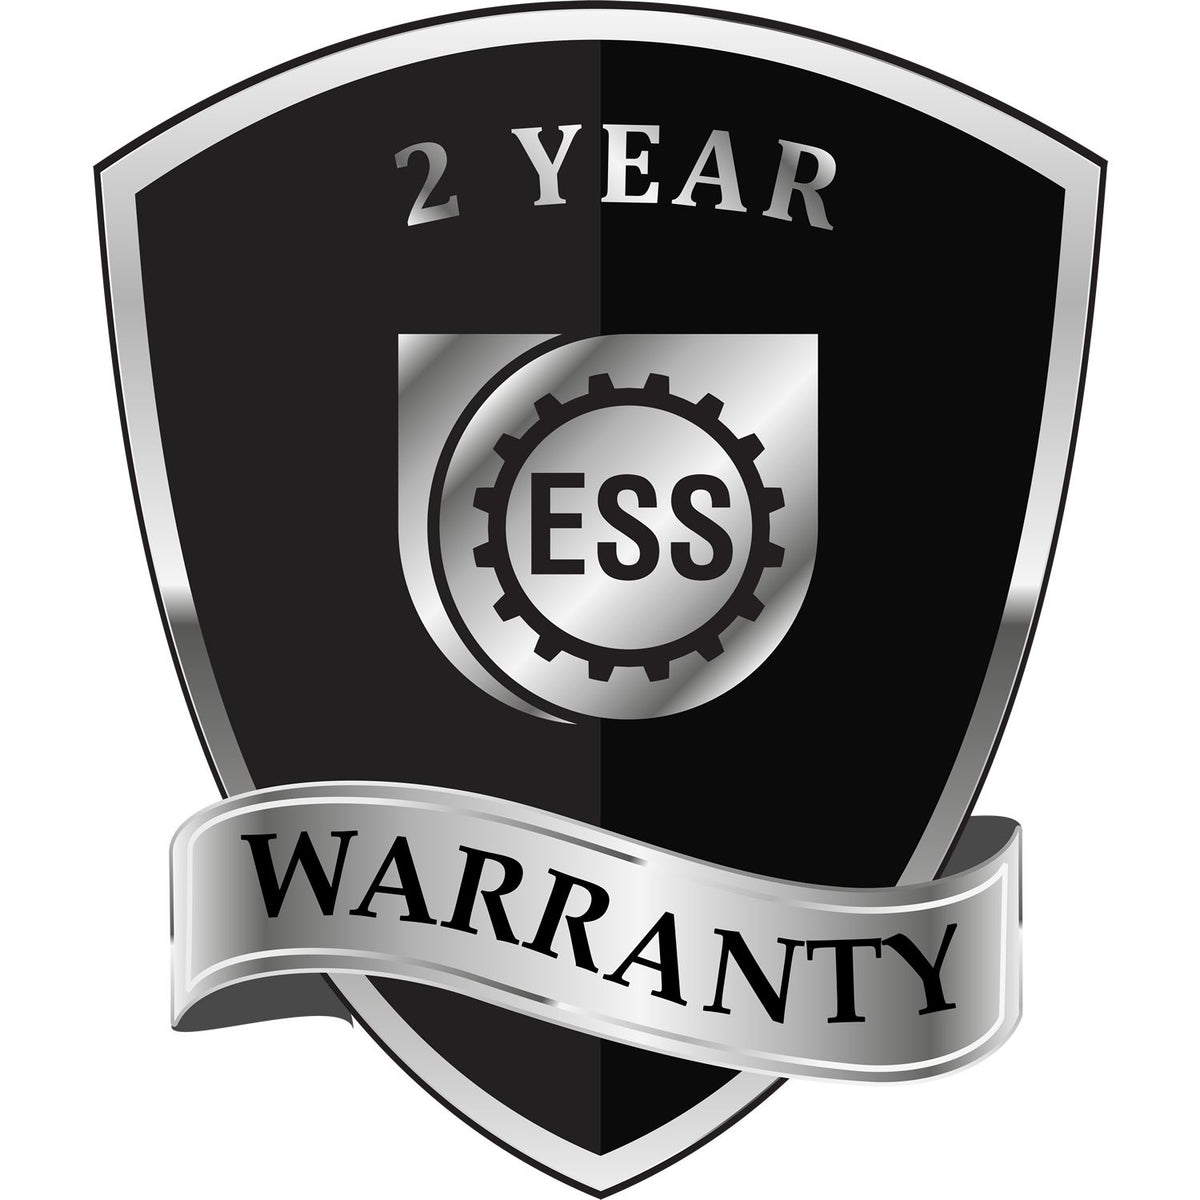 A badge or emblem showing a warranty icon for the Extended Long Reach Nebraska Architect Seal Embosser